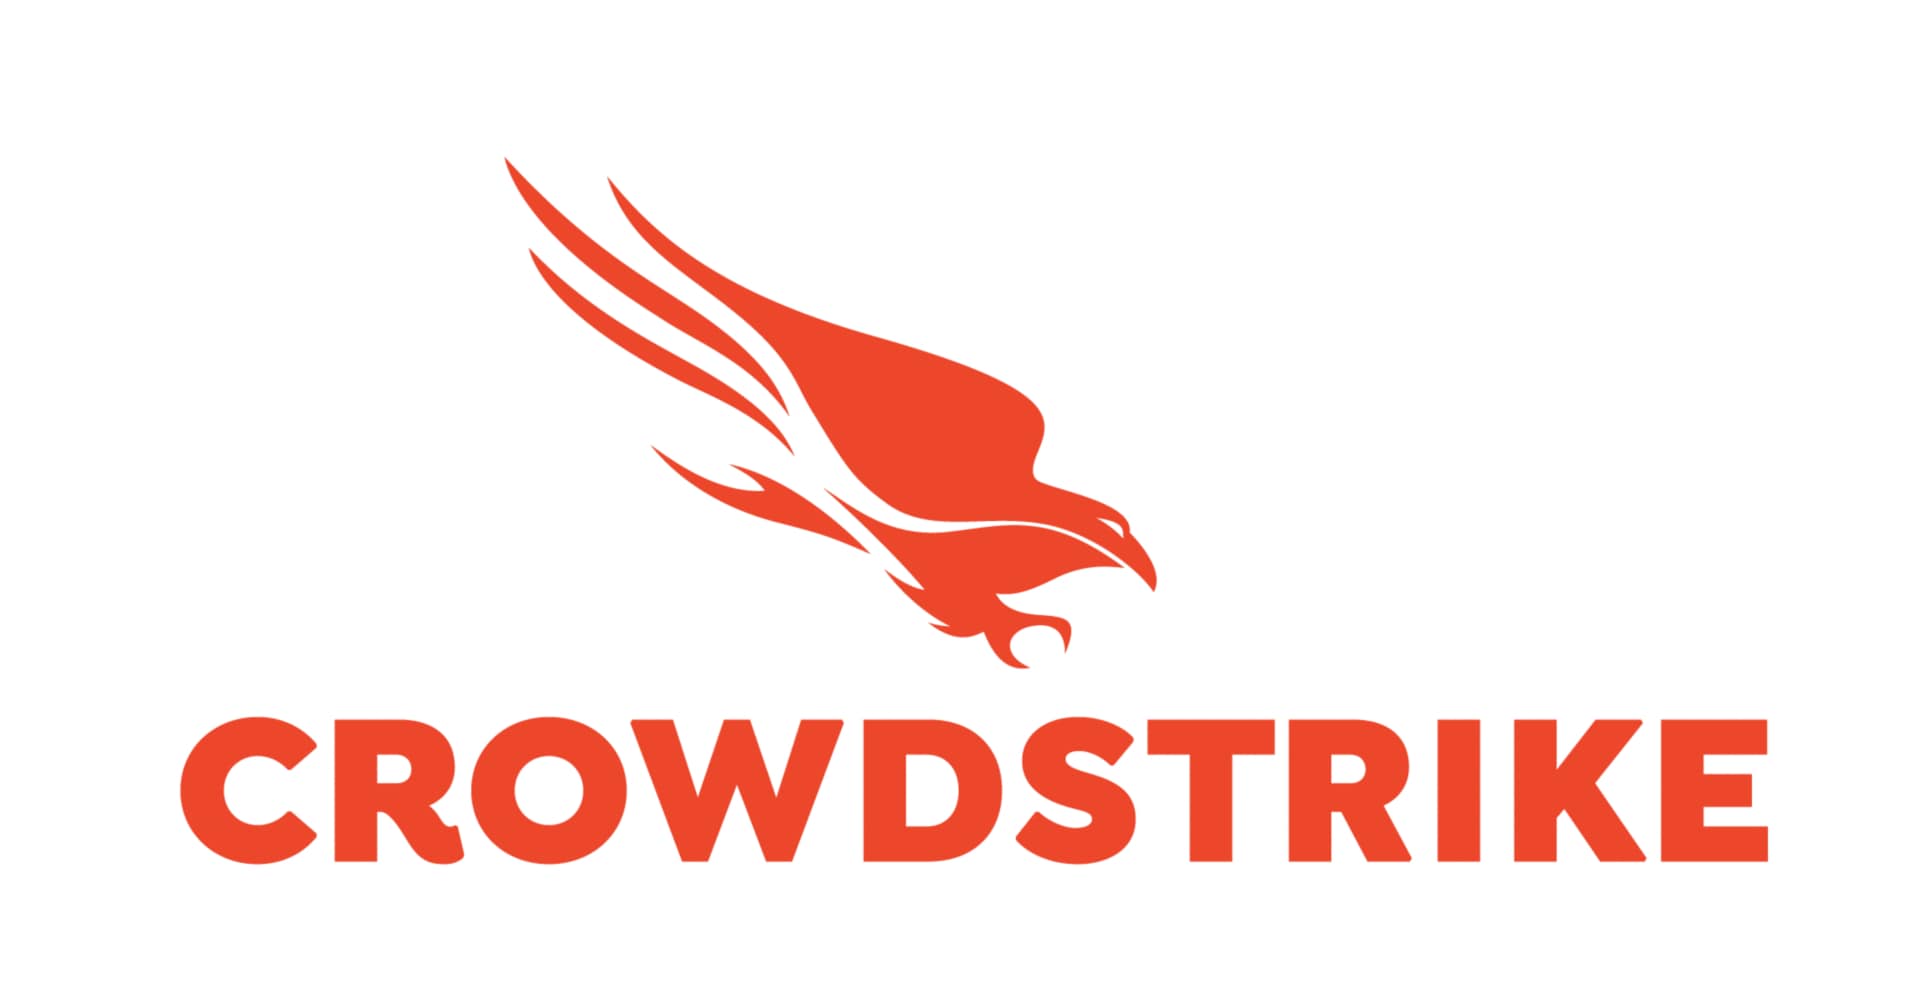 CrowdStrike 31-Month Falcon Cloud Security Reserved - Flex Software